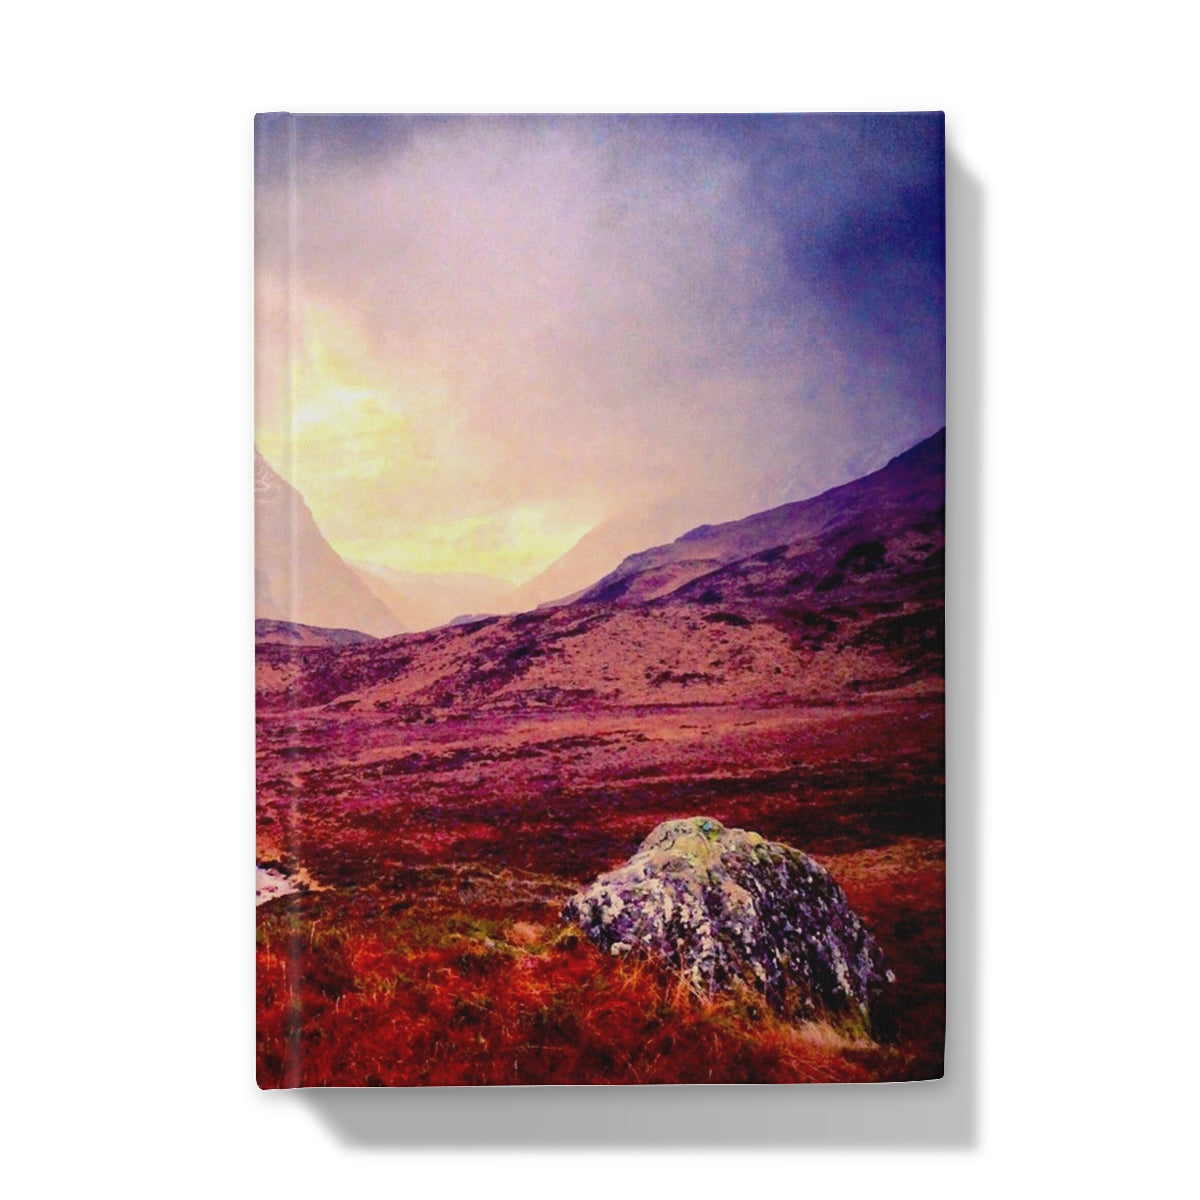 A Brooding Glencoe Art Gifts Hardback Journal-Journals & Notebooks-Glencoe Art Gallery-A4-Lined-Paintings, Prints, Homeware, Art Gifts From Scotland By Scottish Artist Kevin Hunter